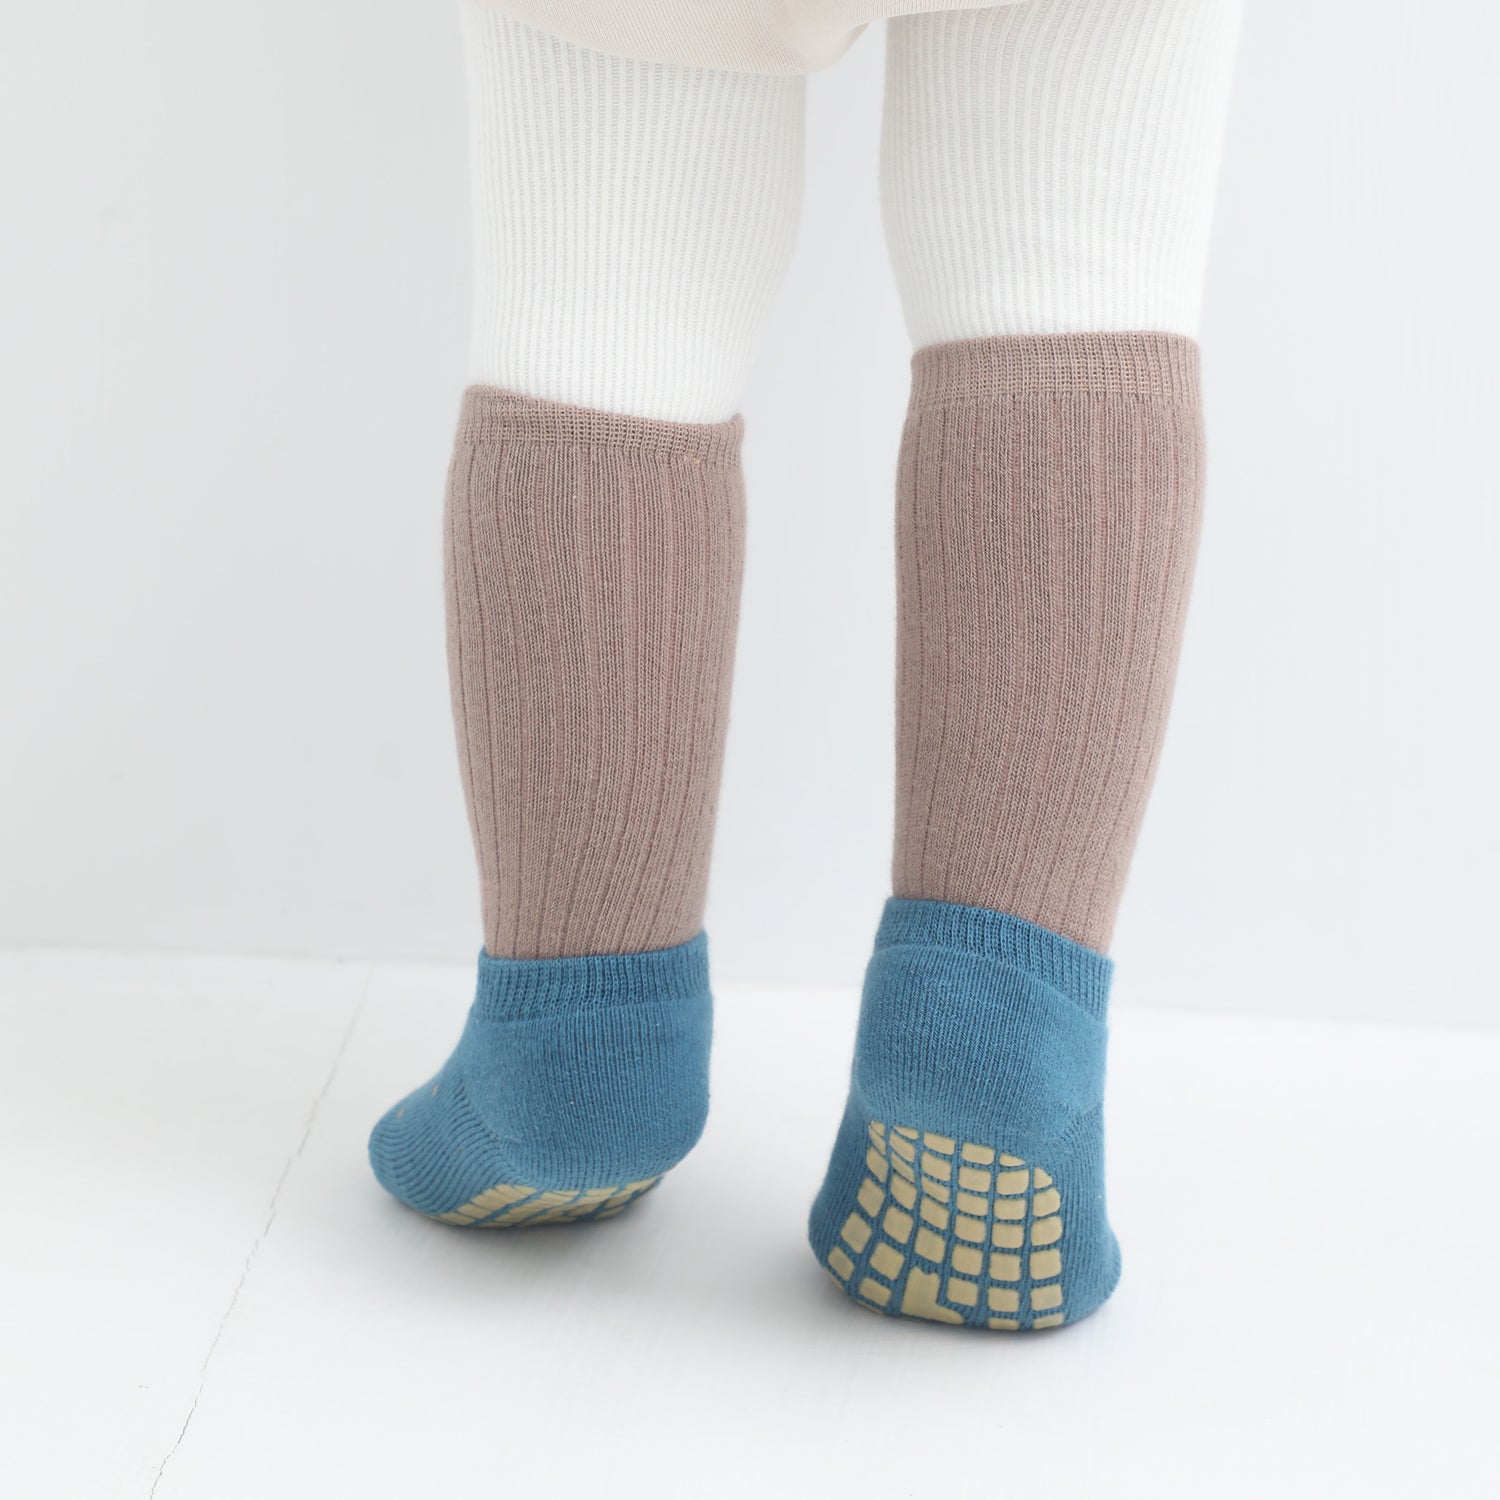 Classic look baby socks by Babysoy, solid colored with non-slip features for elegance and safety.